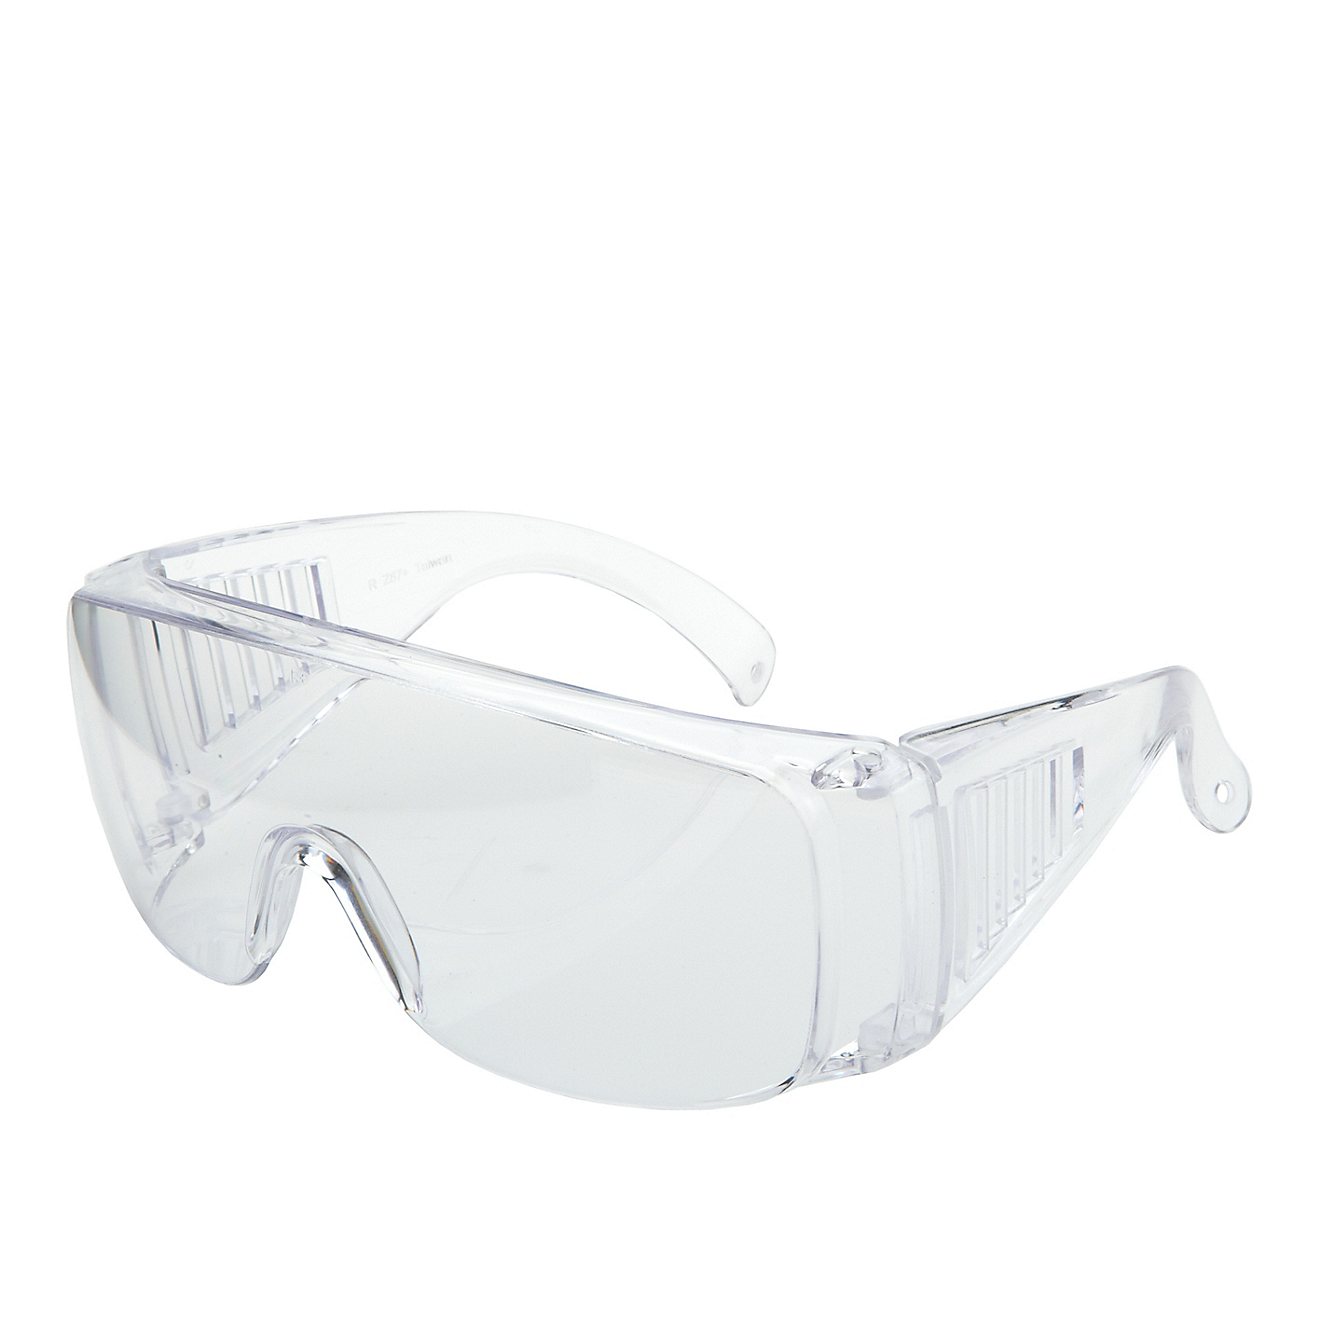 Radians Coveralls Shooting Glasses Clear Cv0010 for sale online 